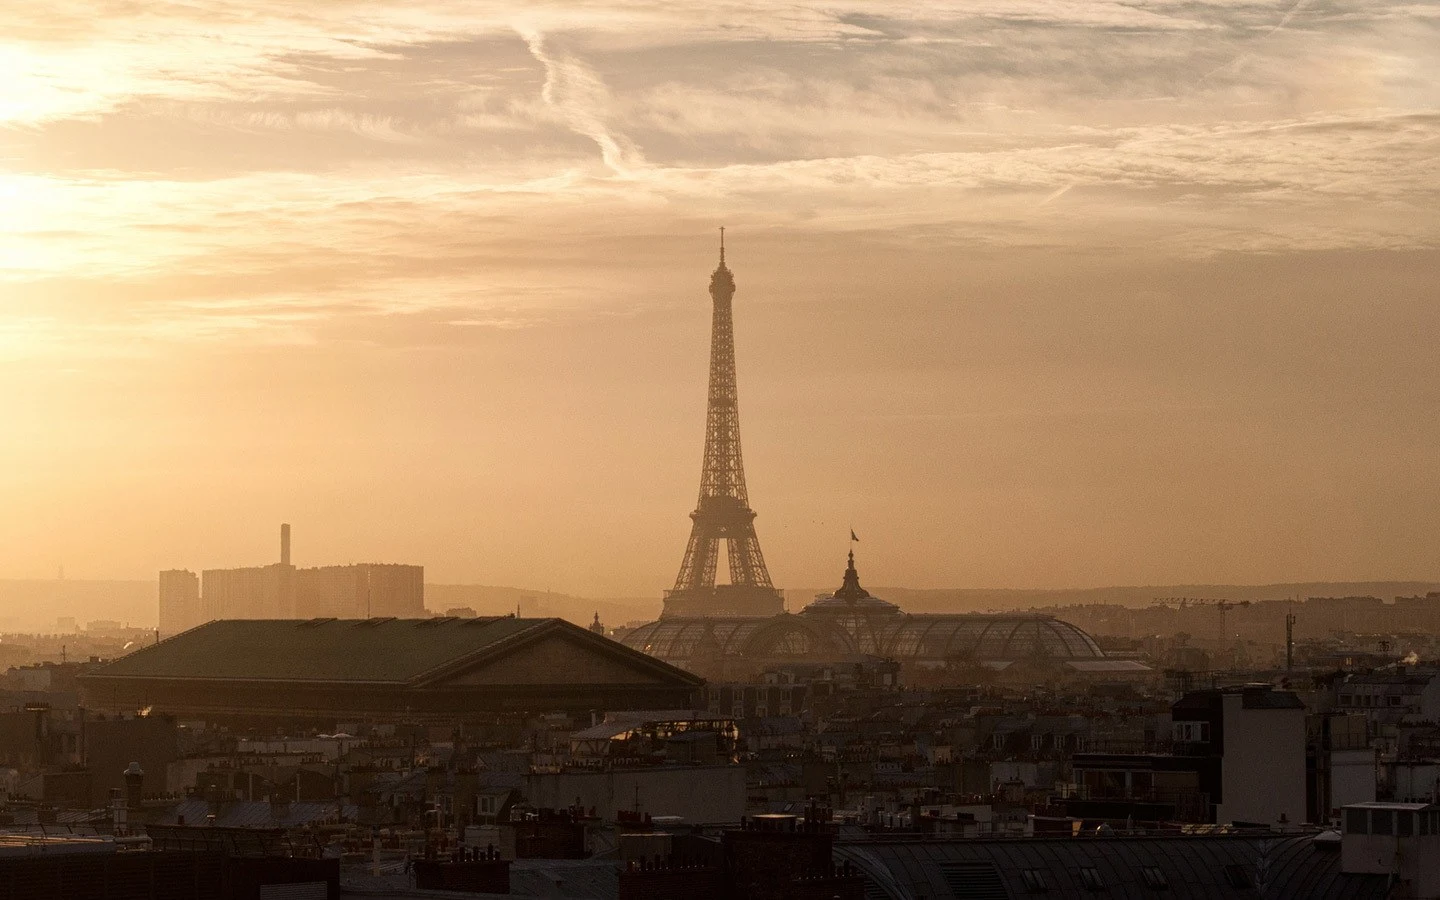 Sunset views of the Eiffel Tower from the top of Galeries Lafayette Haussmann